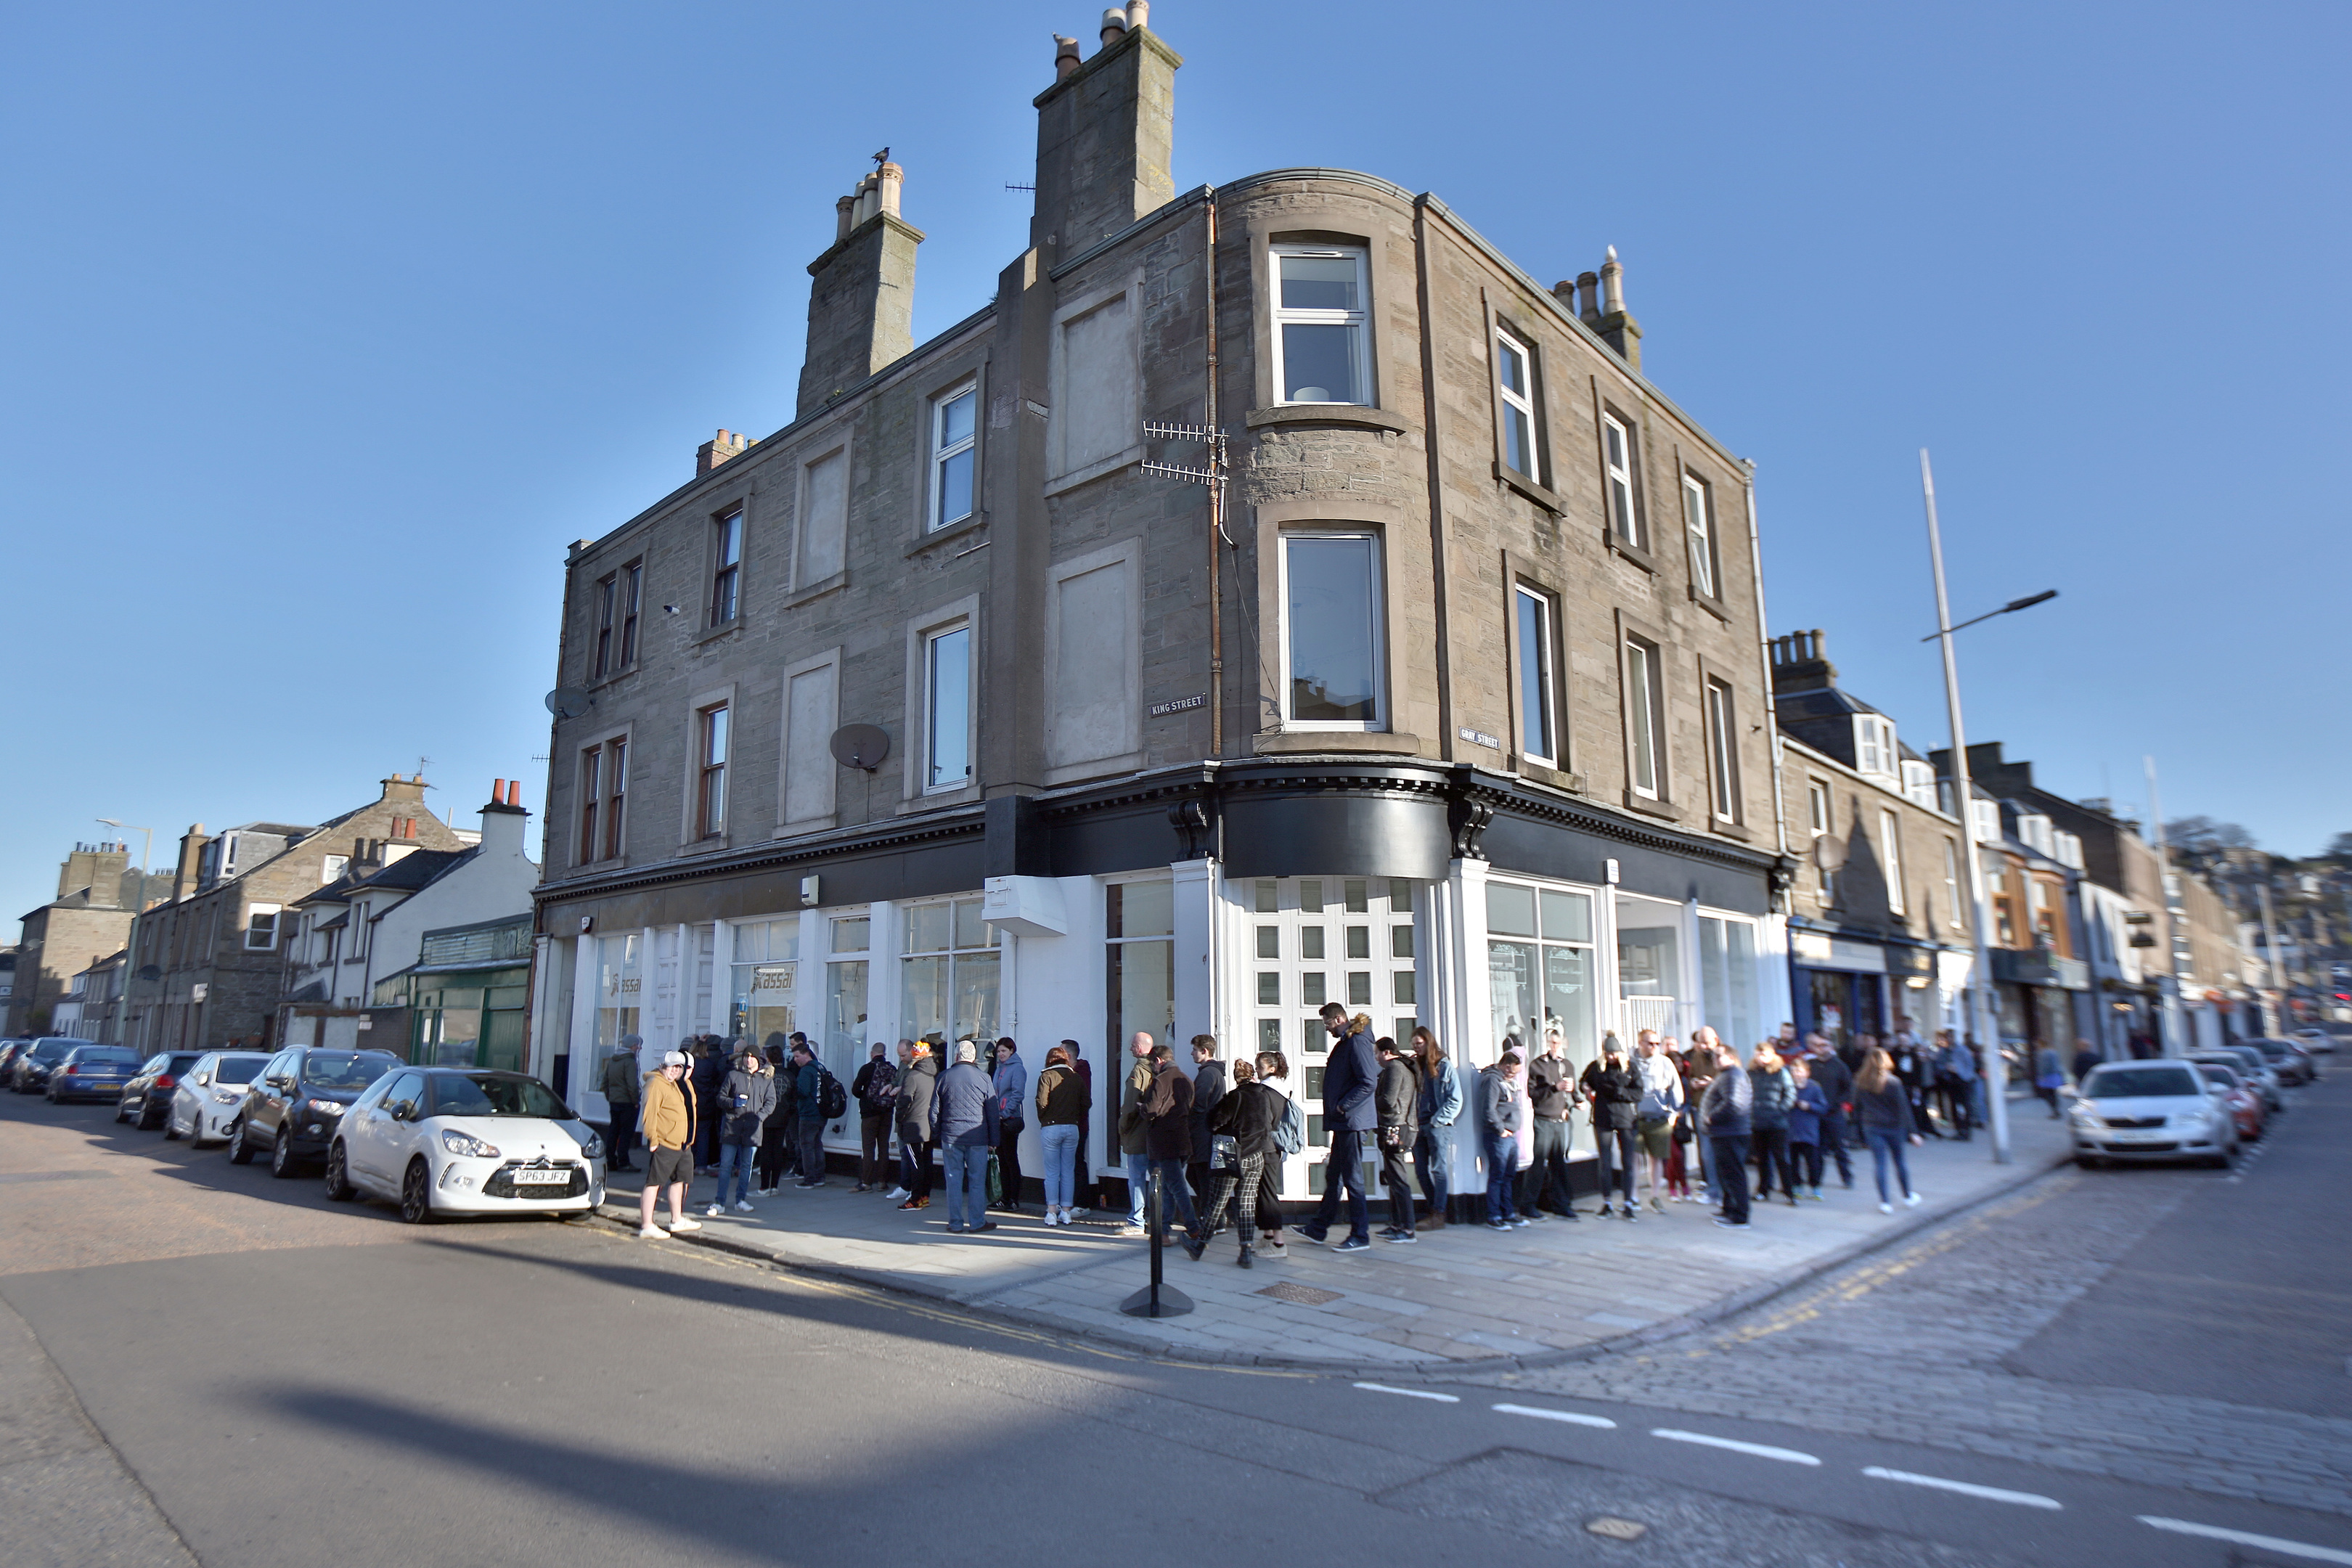 Crowds lined up outside Assai‘s previous shop in Broughty Ferry for Record Store Day.